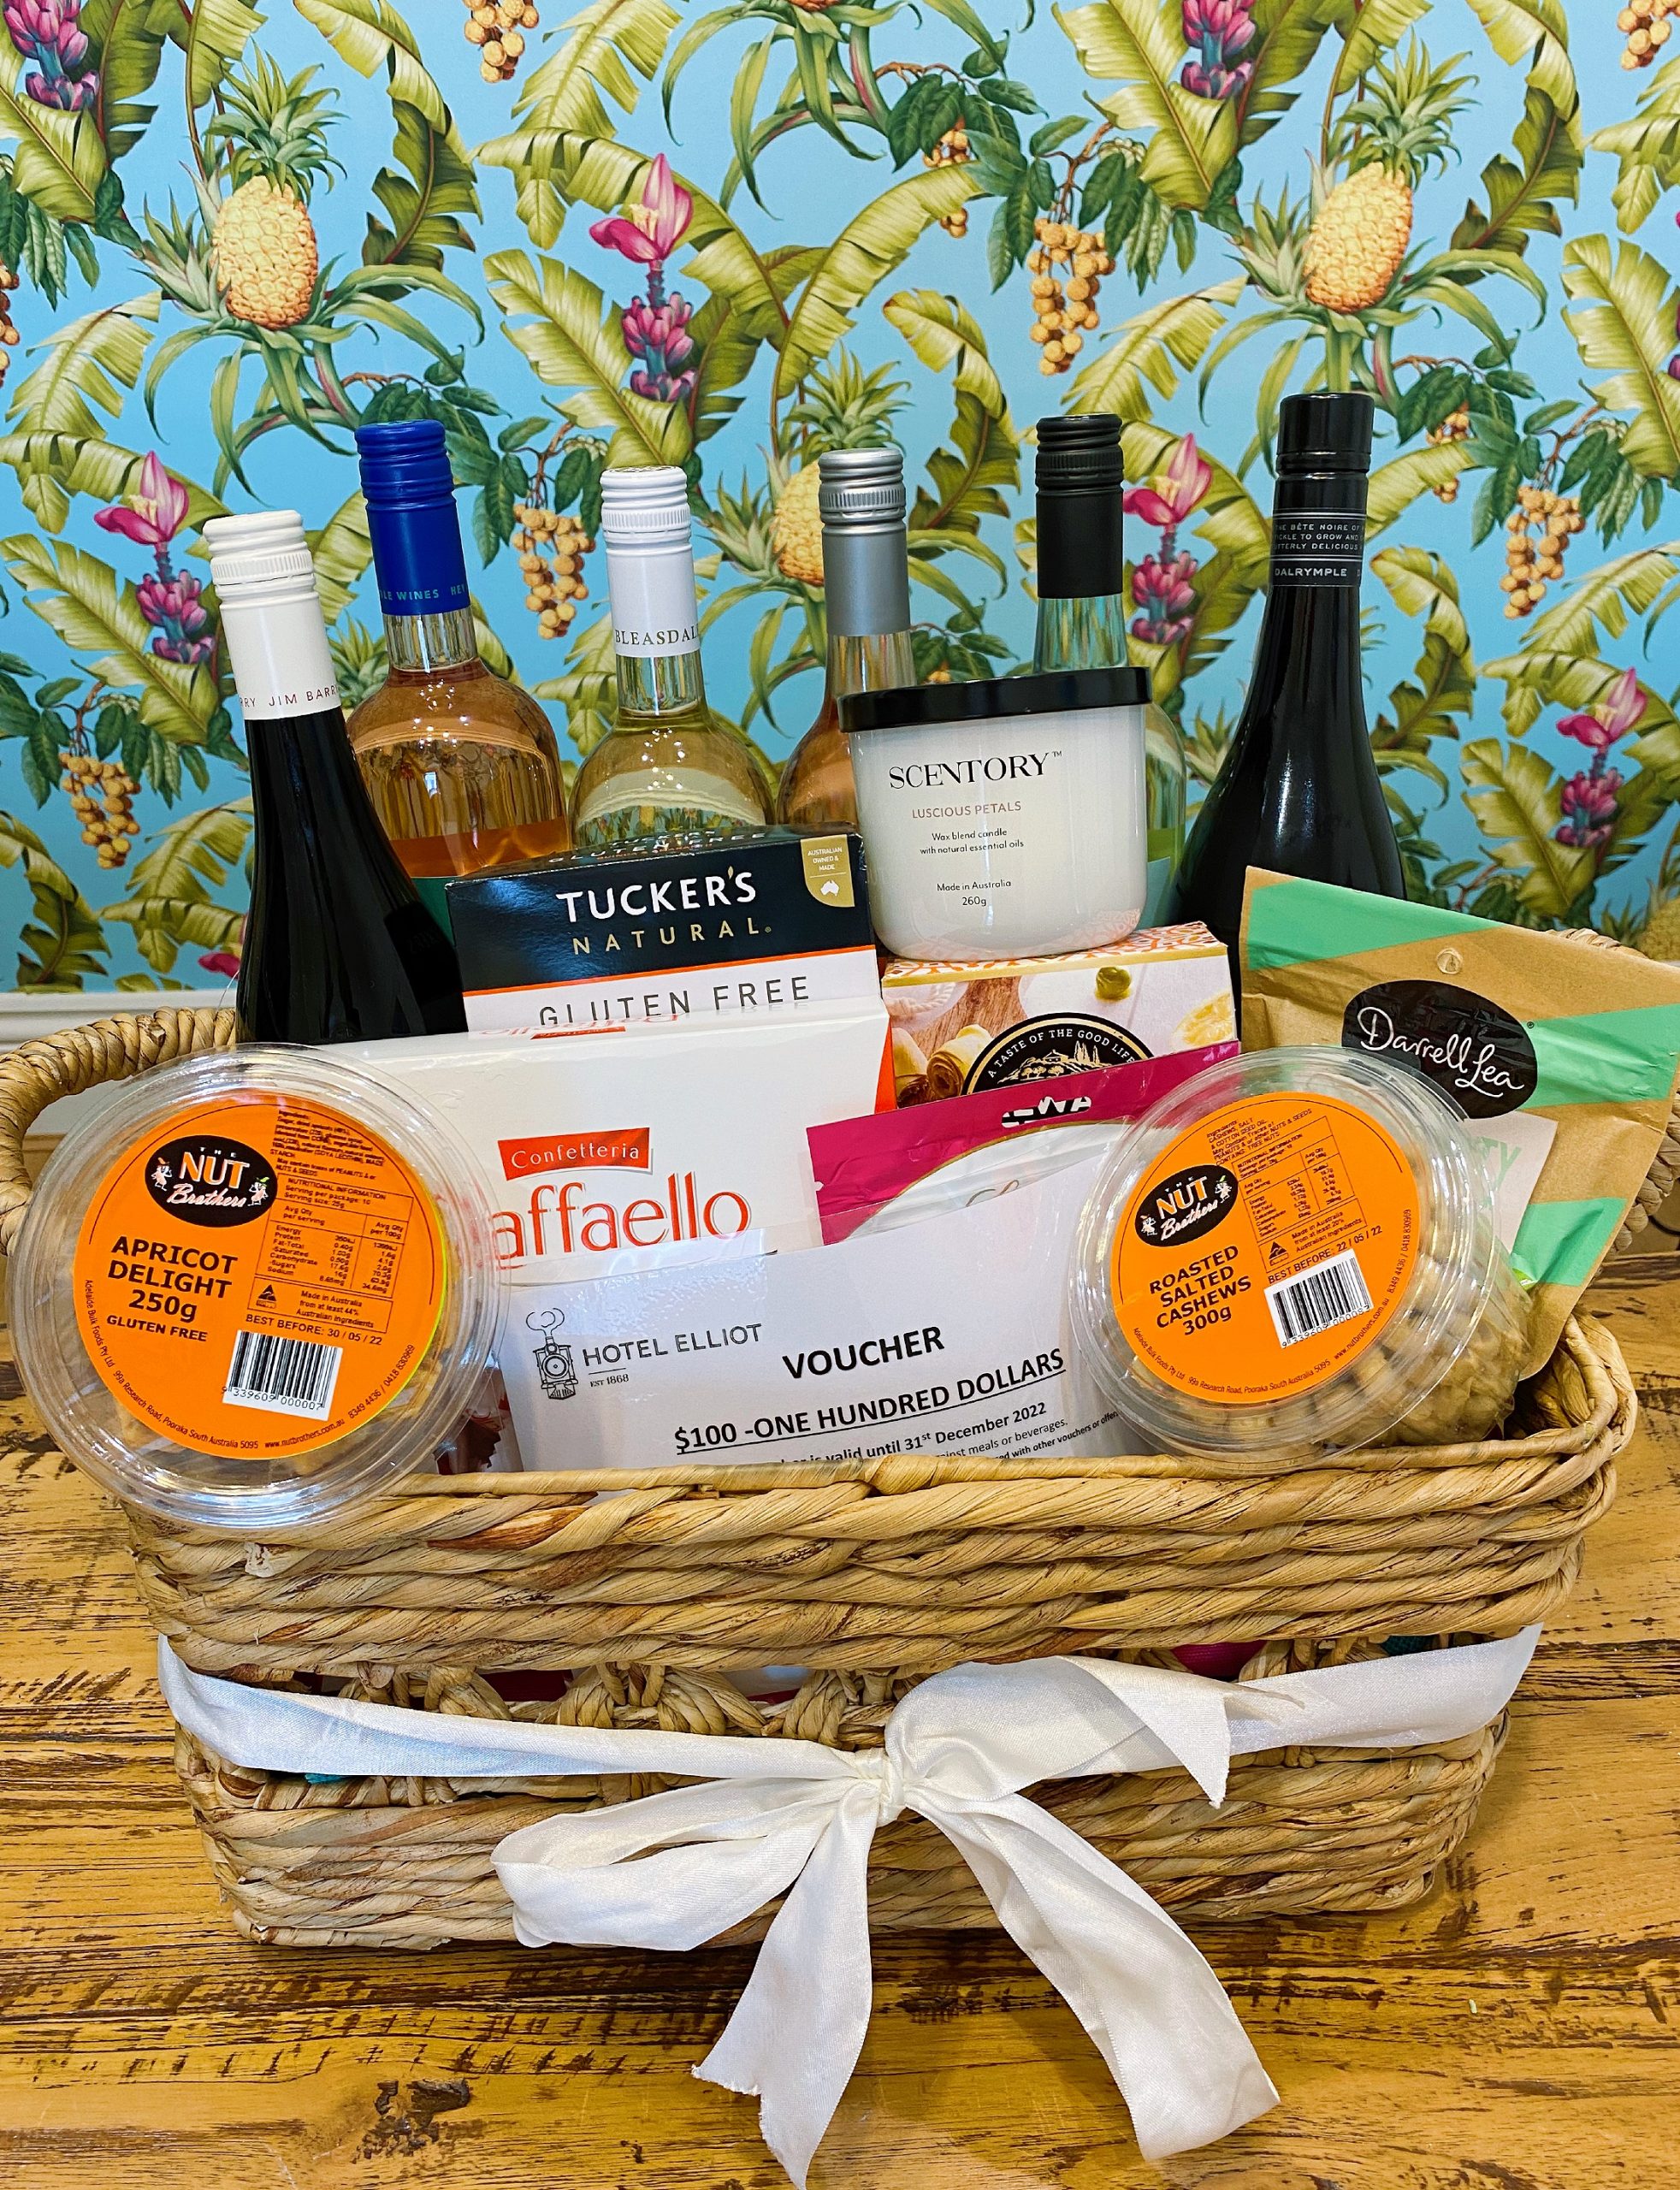 WIN an epic hamper filled with delicious eats and drinks thanks to Hotel Elliot